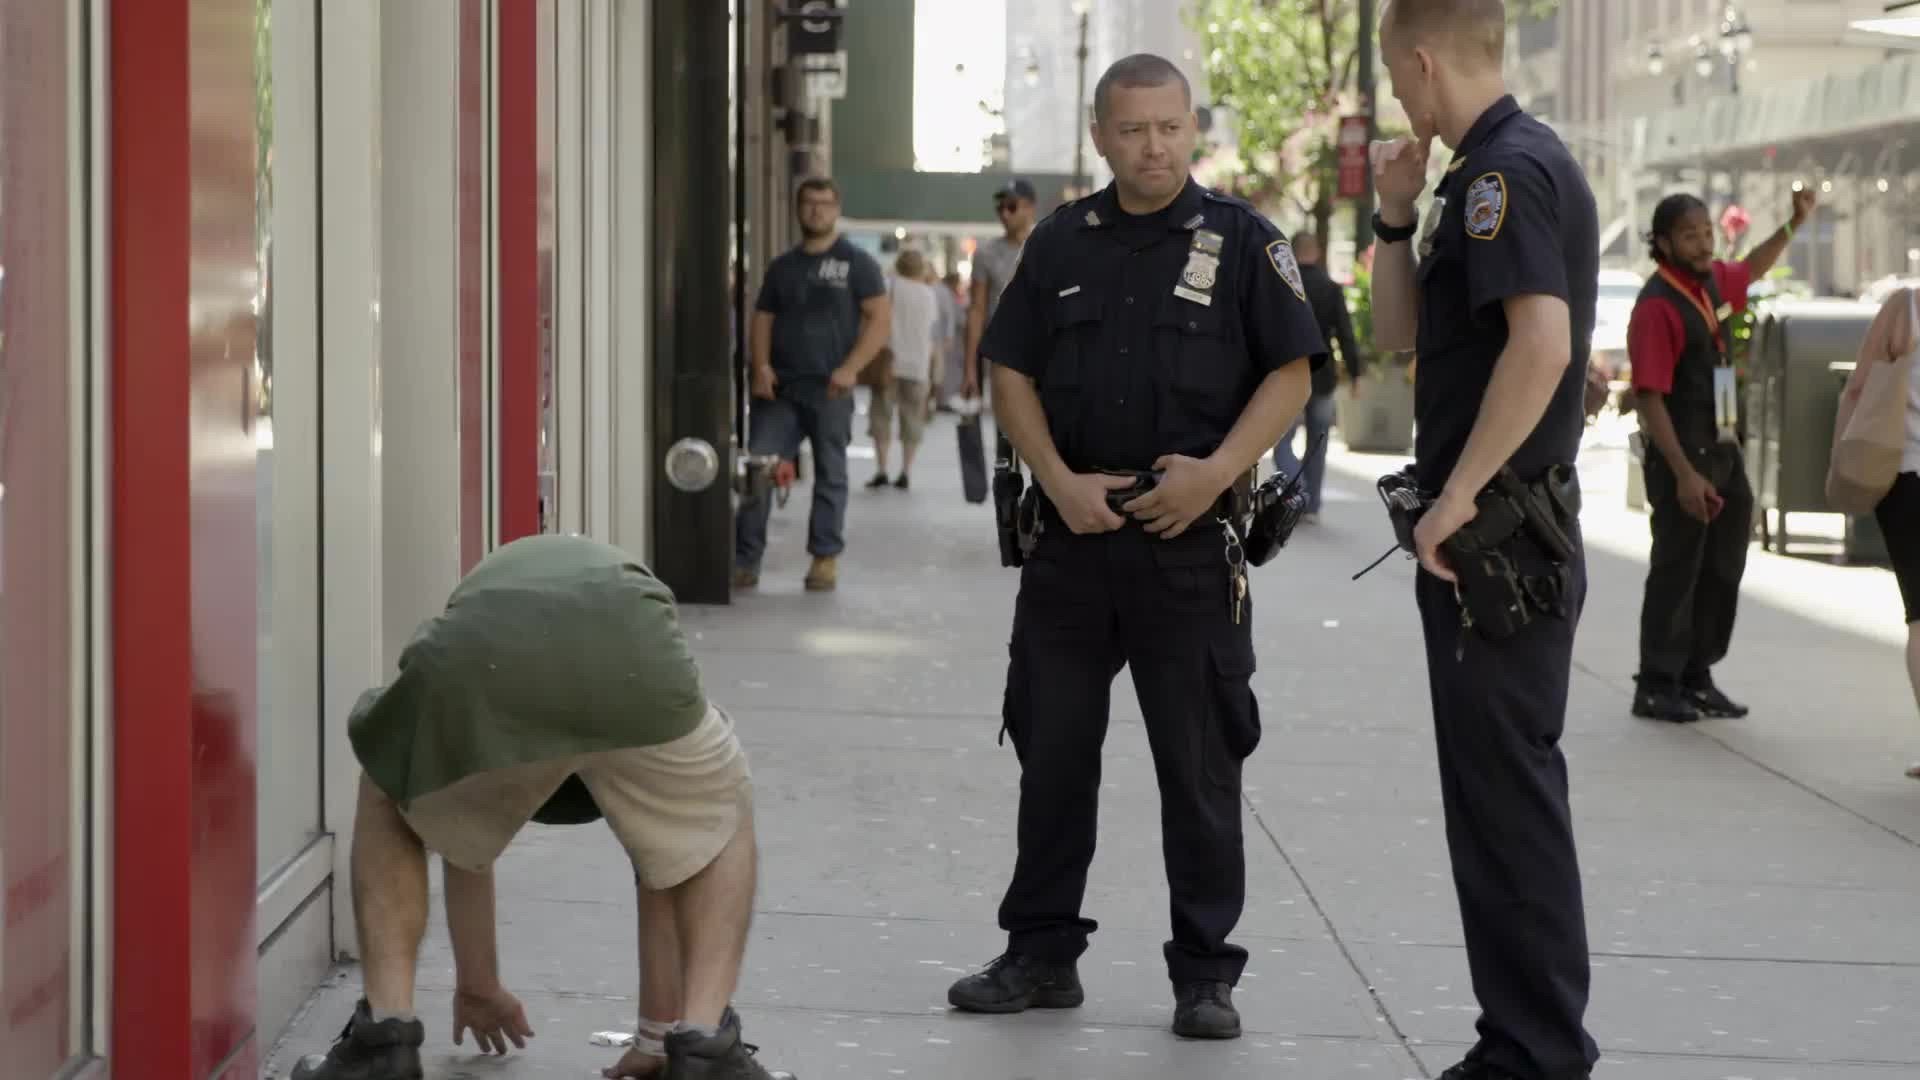 NYPD police officers and drunk homeless man getting up off street in Midtown Manhattan on summer day